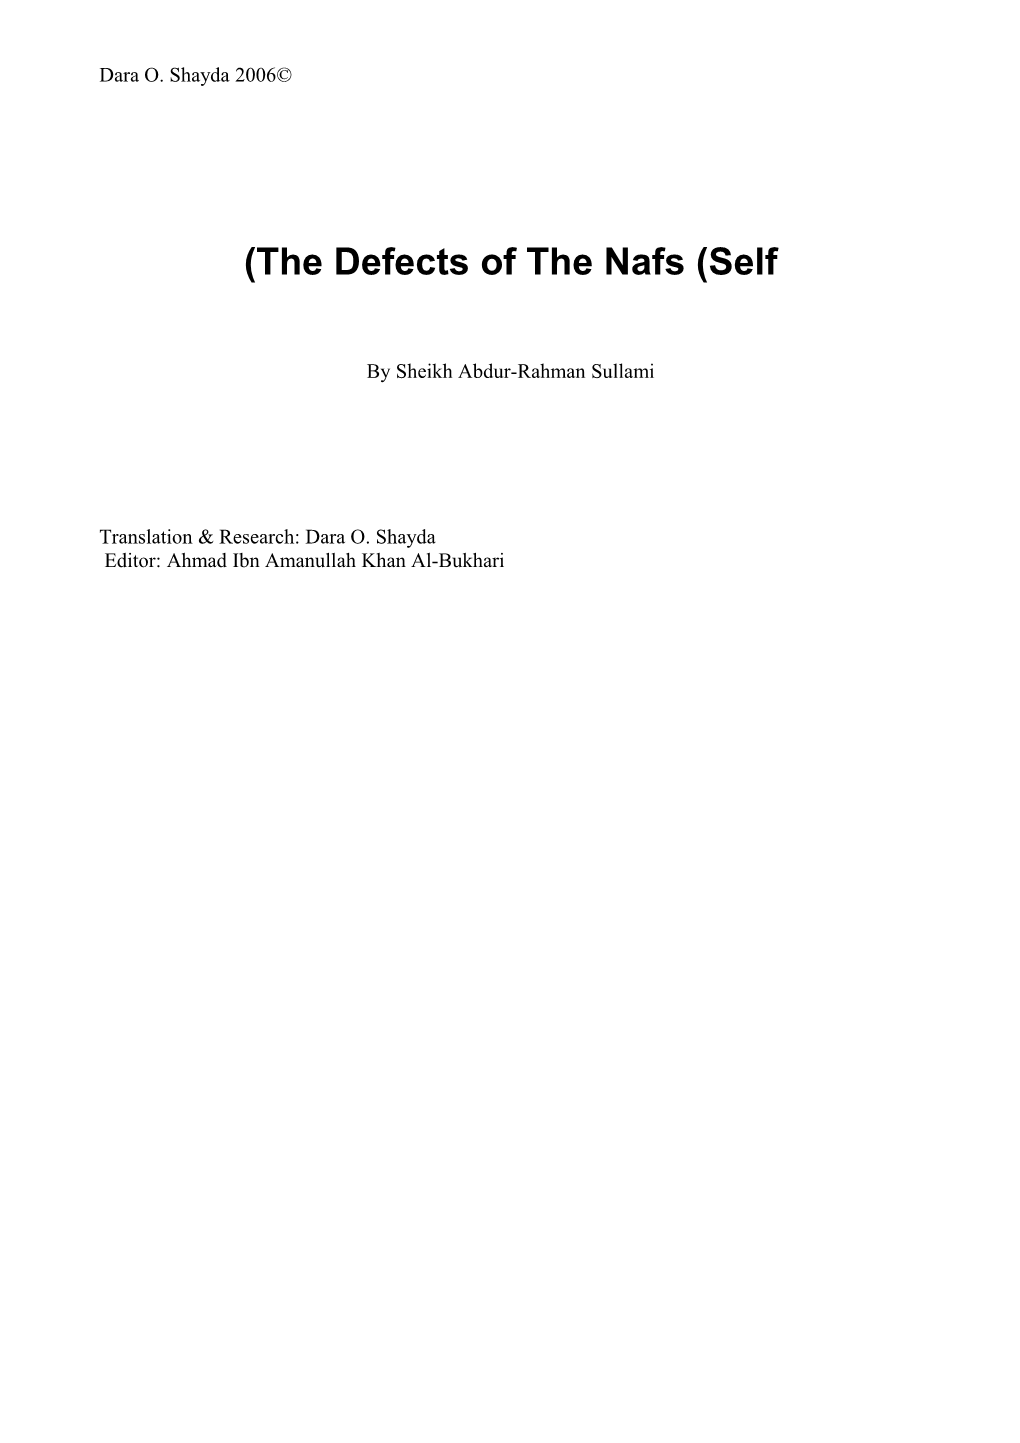 The Defects of the Nafs (Self)